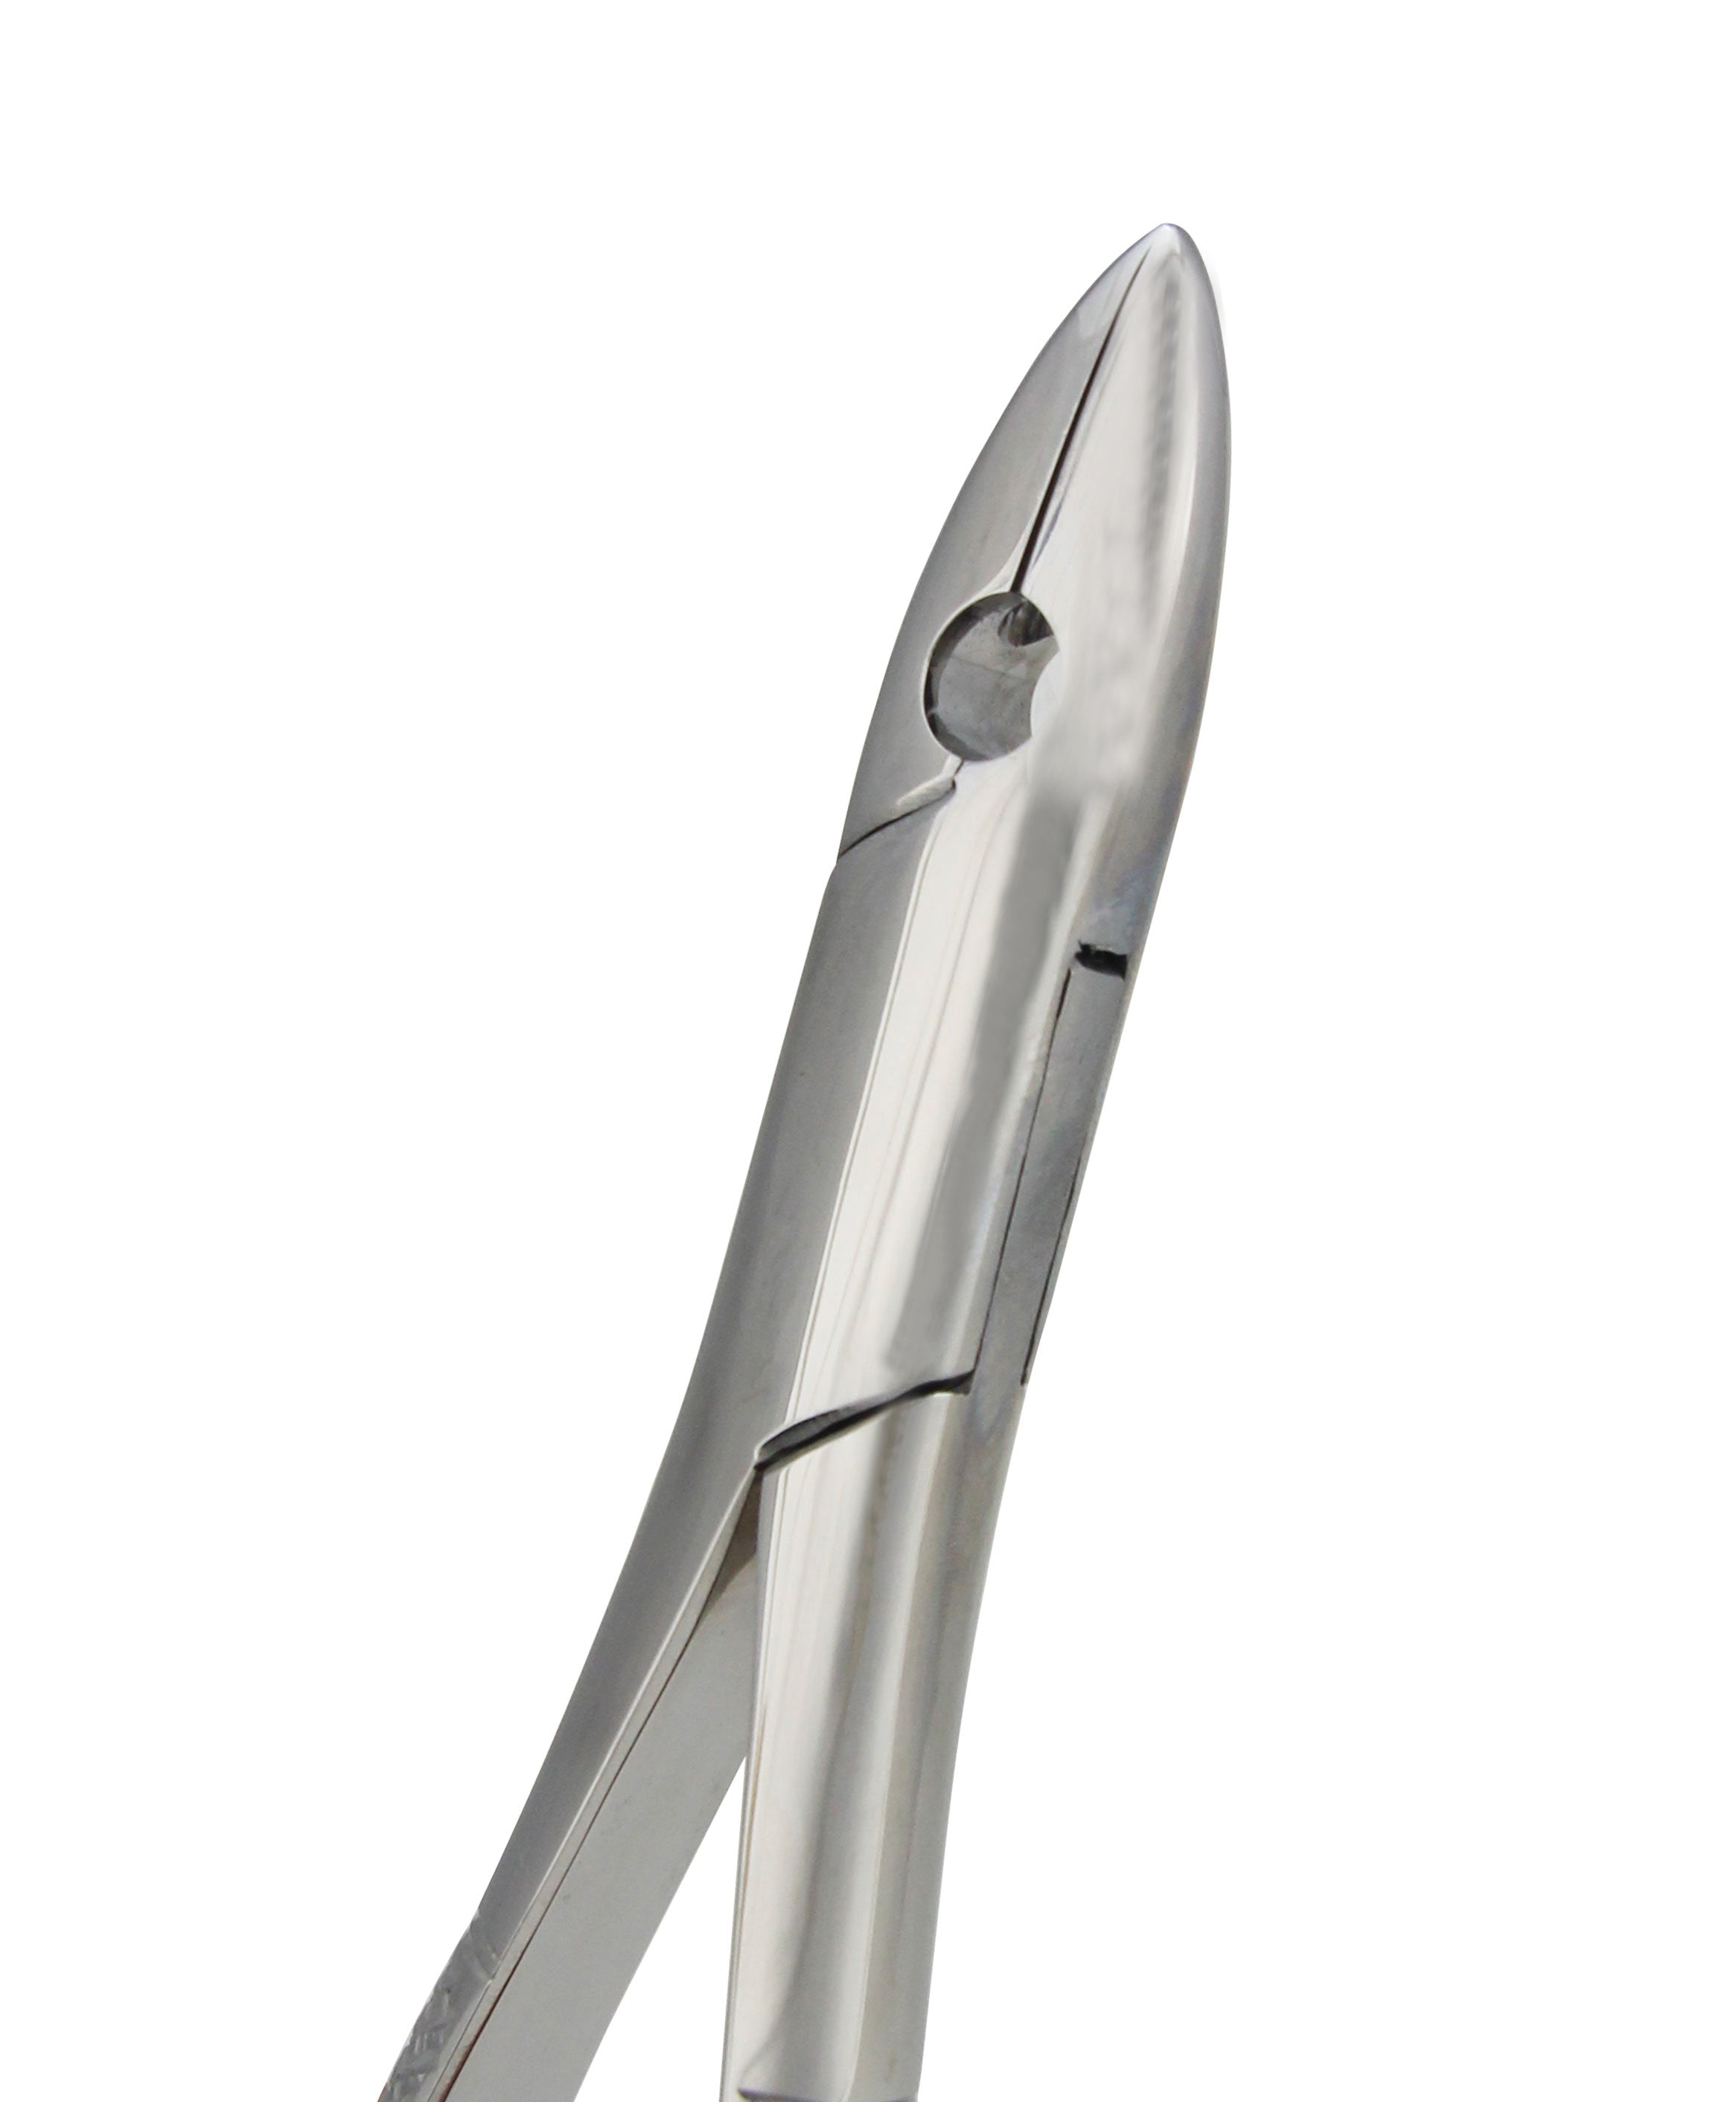 Extraction Forceps 001